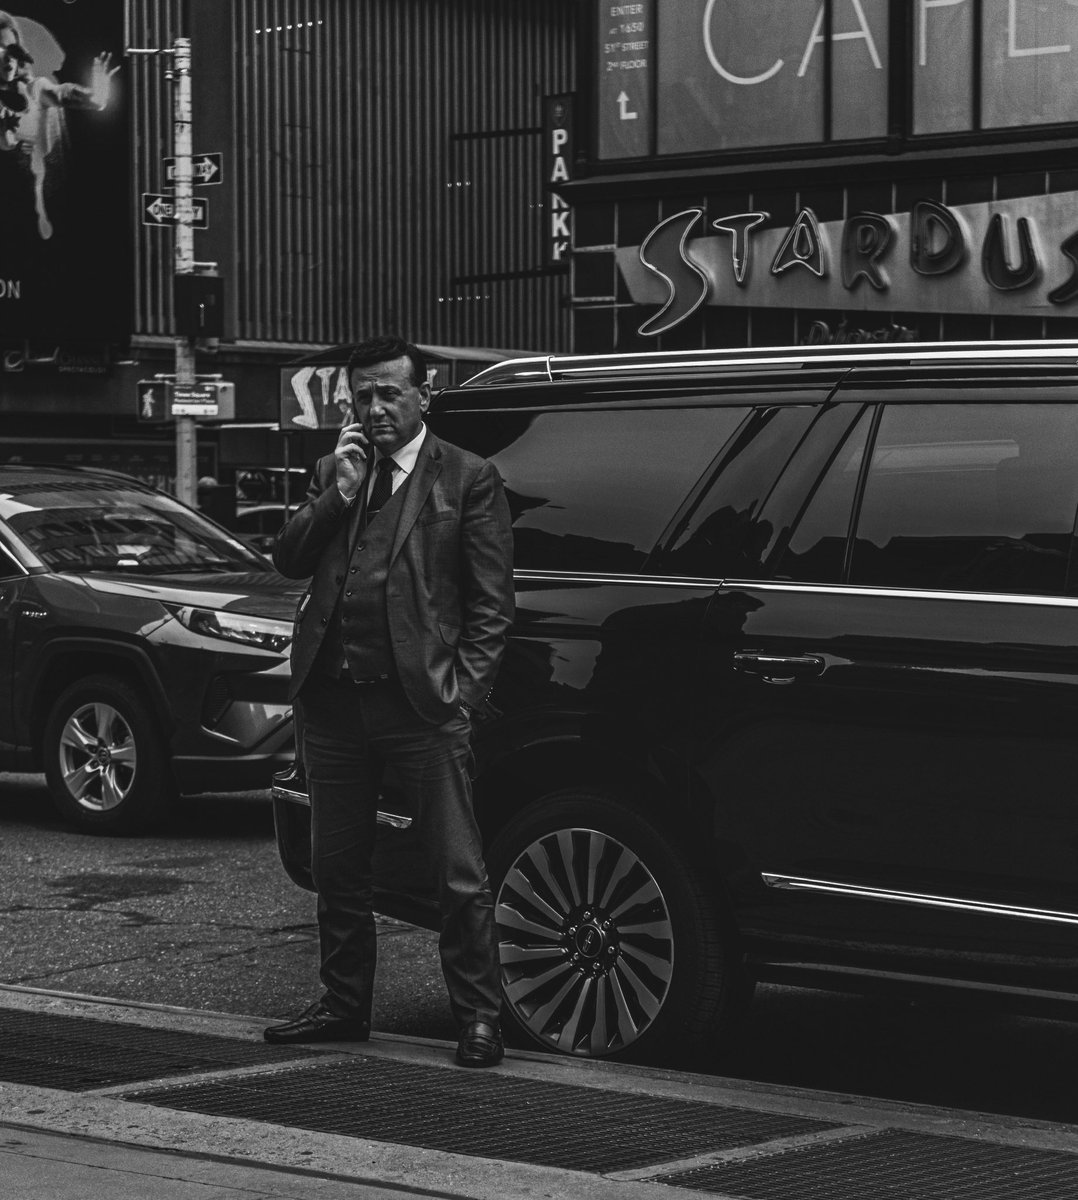 Suited & Booted #streetphoto #streetphotographer #streetpic #streetphoto #bnwphotography #blackandwhitephoto #blackandwhitephotography